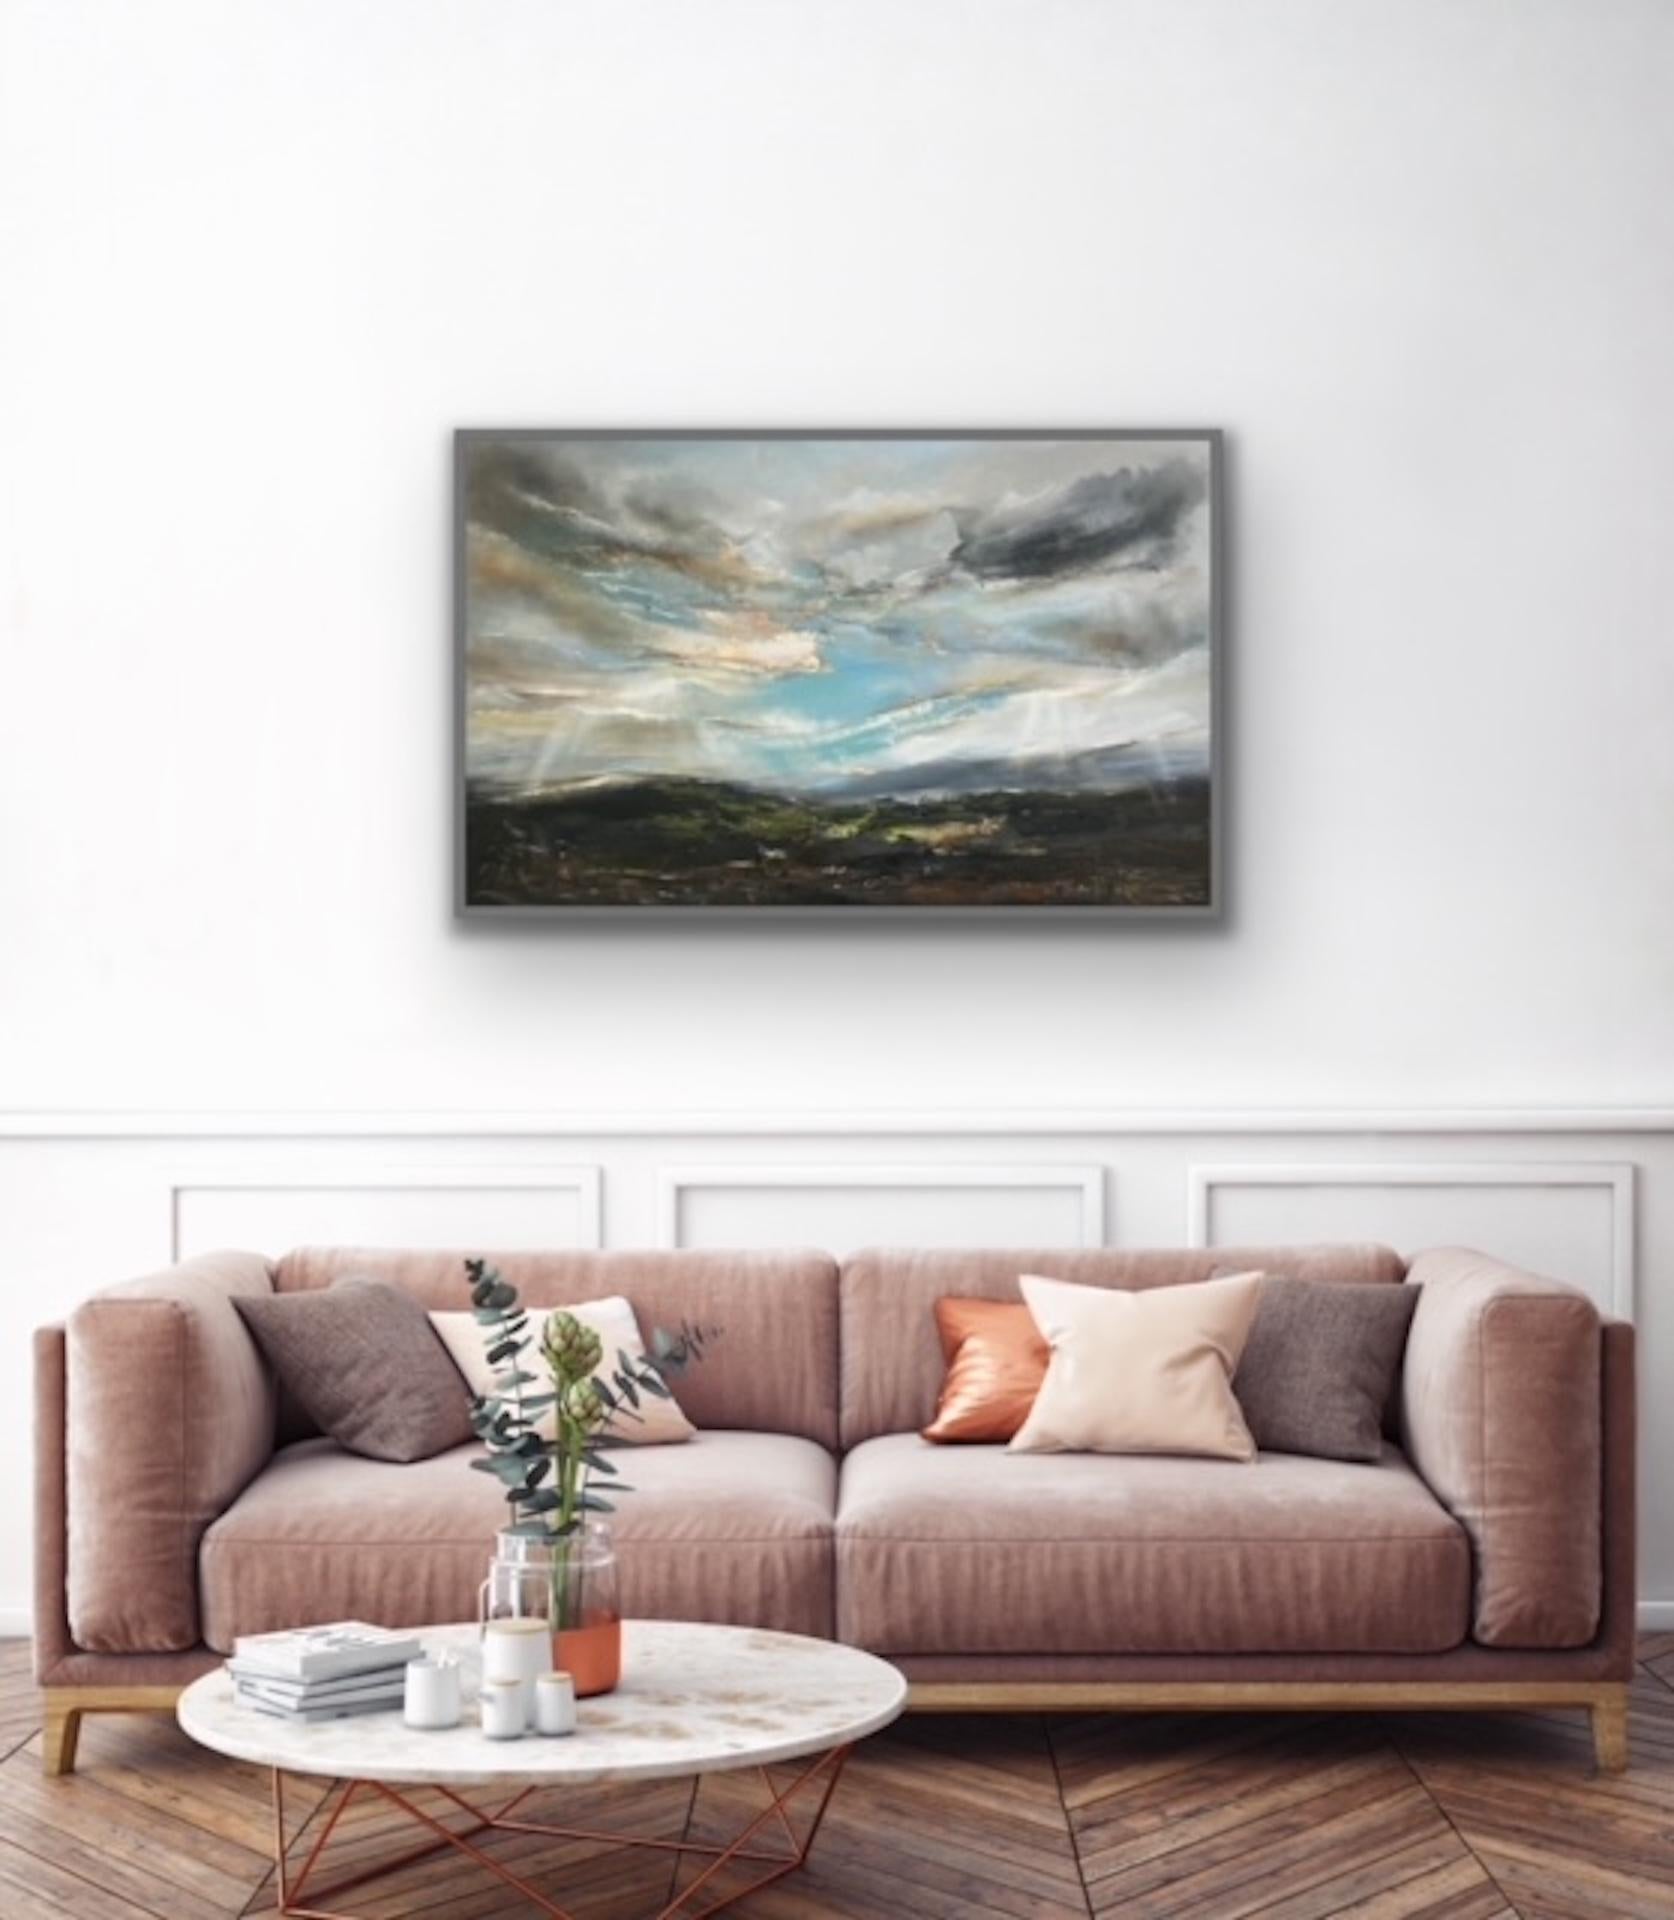 Looking Towards Home [2021]
original

Oil on Canvas

Image size: H:76 cm x W:122 cm

Complete Size of Unframed Work: H:76 cm x W:122 cm x D:3cm

Sold Unframed

Please note that insitu images are purely an indication of how a piece may look

‘Looking